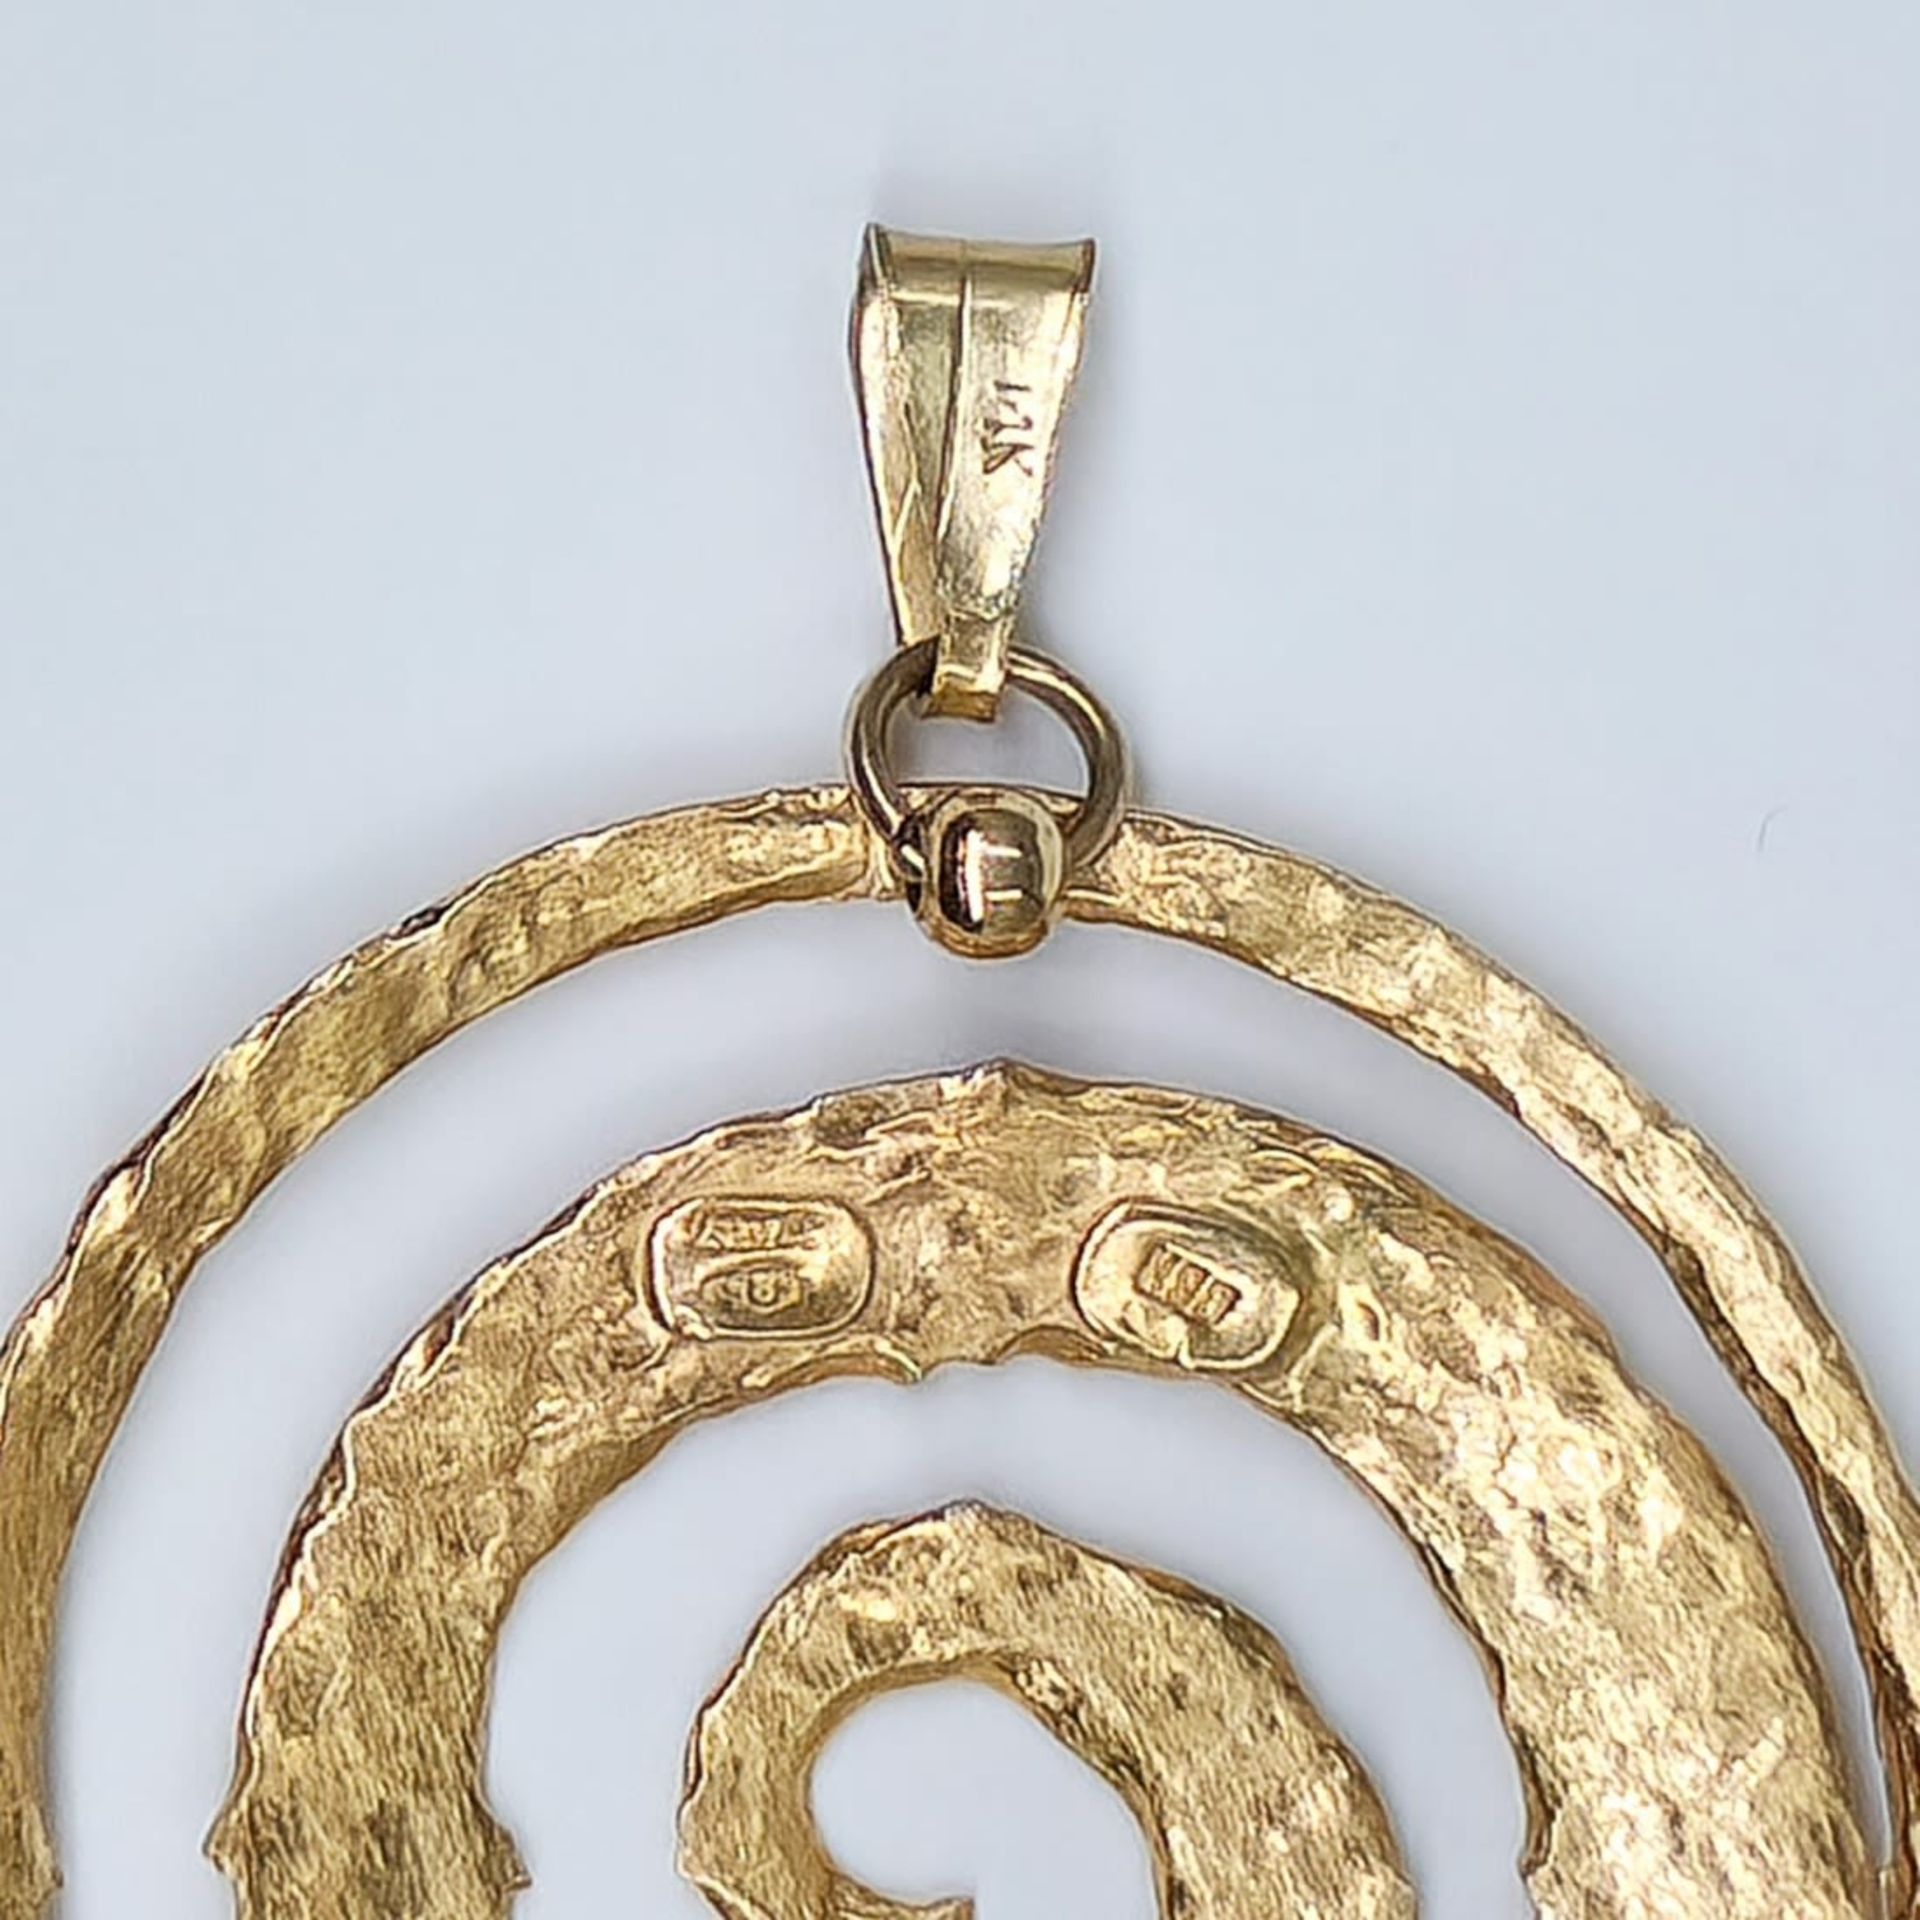 14K gold pendant of a spiral shape, signed, Weight: 5.78 grams, Diameter: 4 cm, Height including the - Image 3 of 4